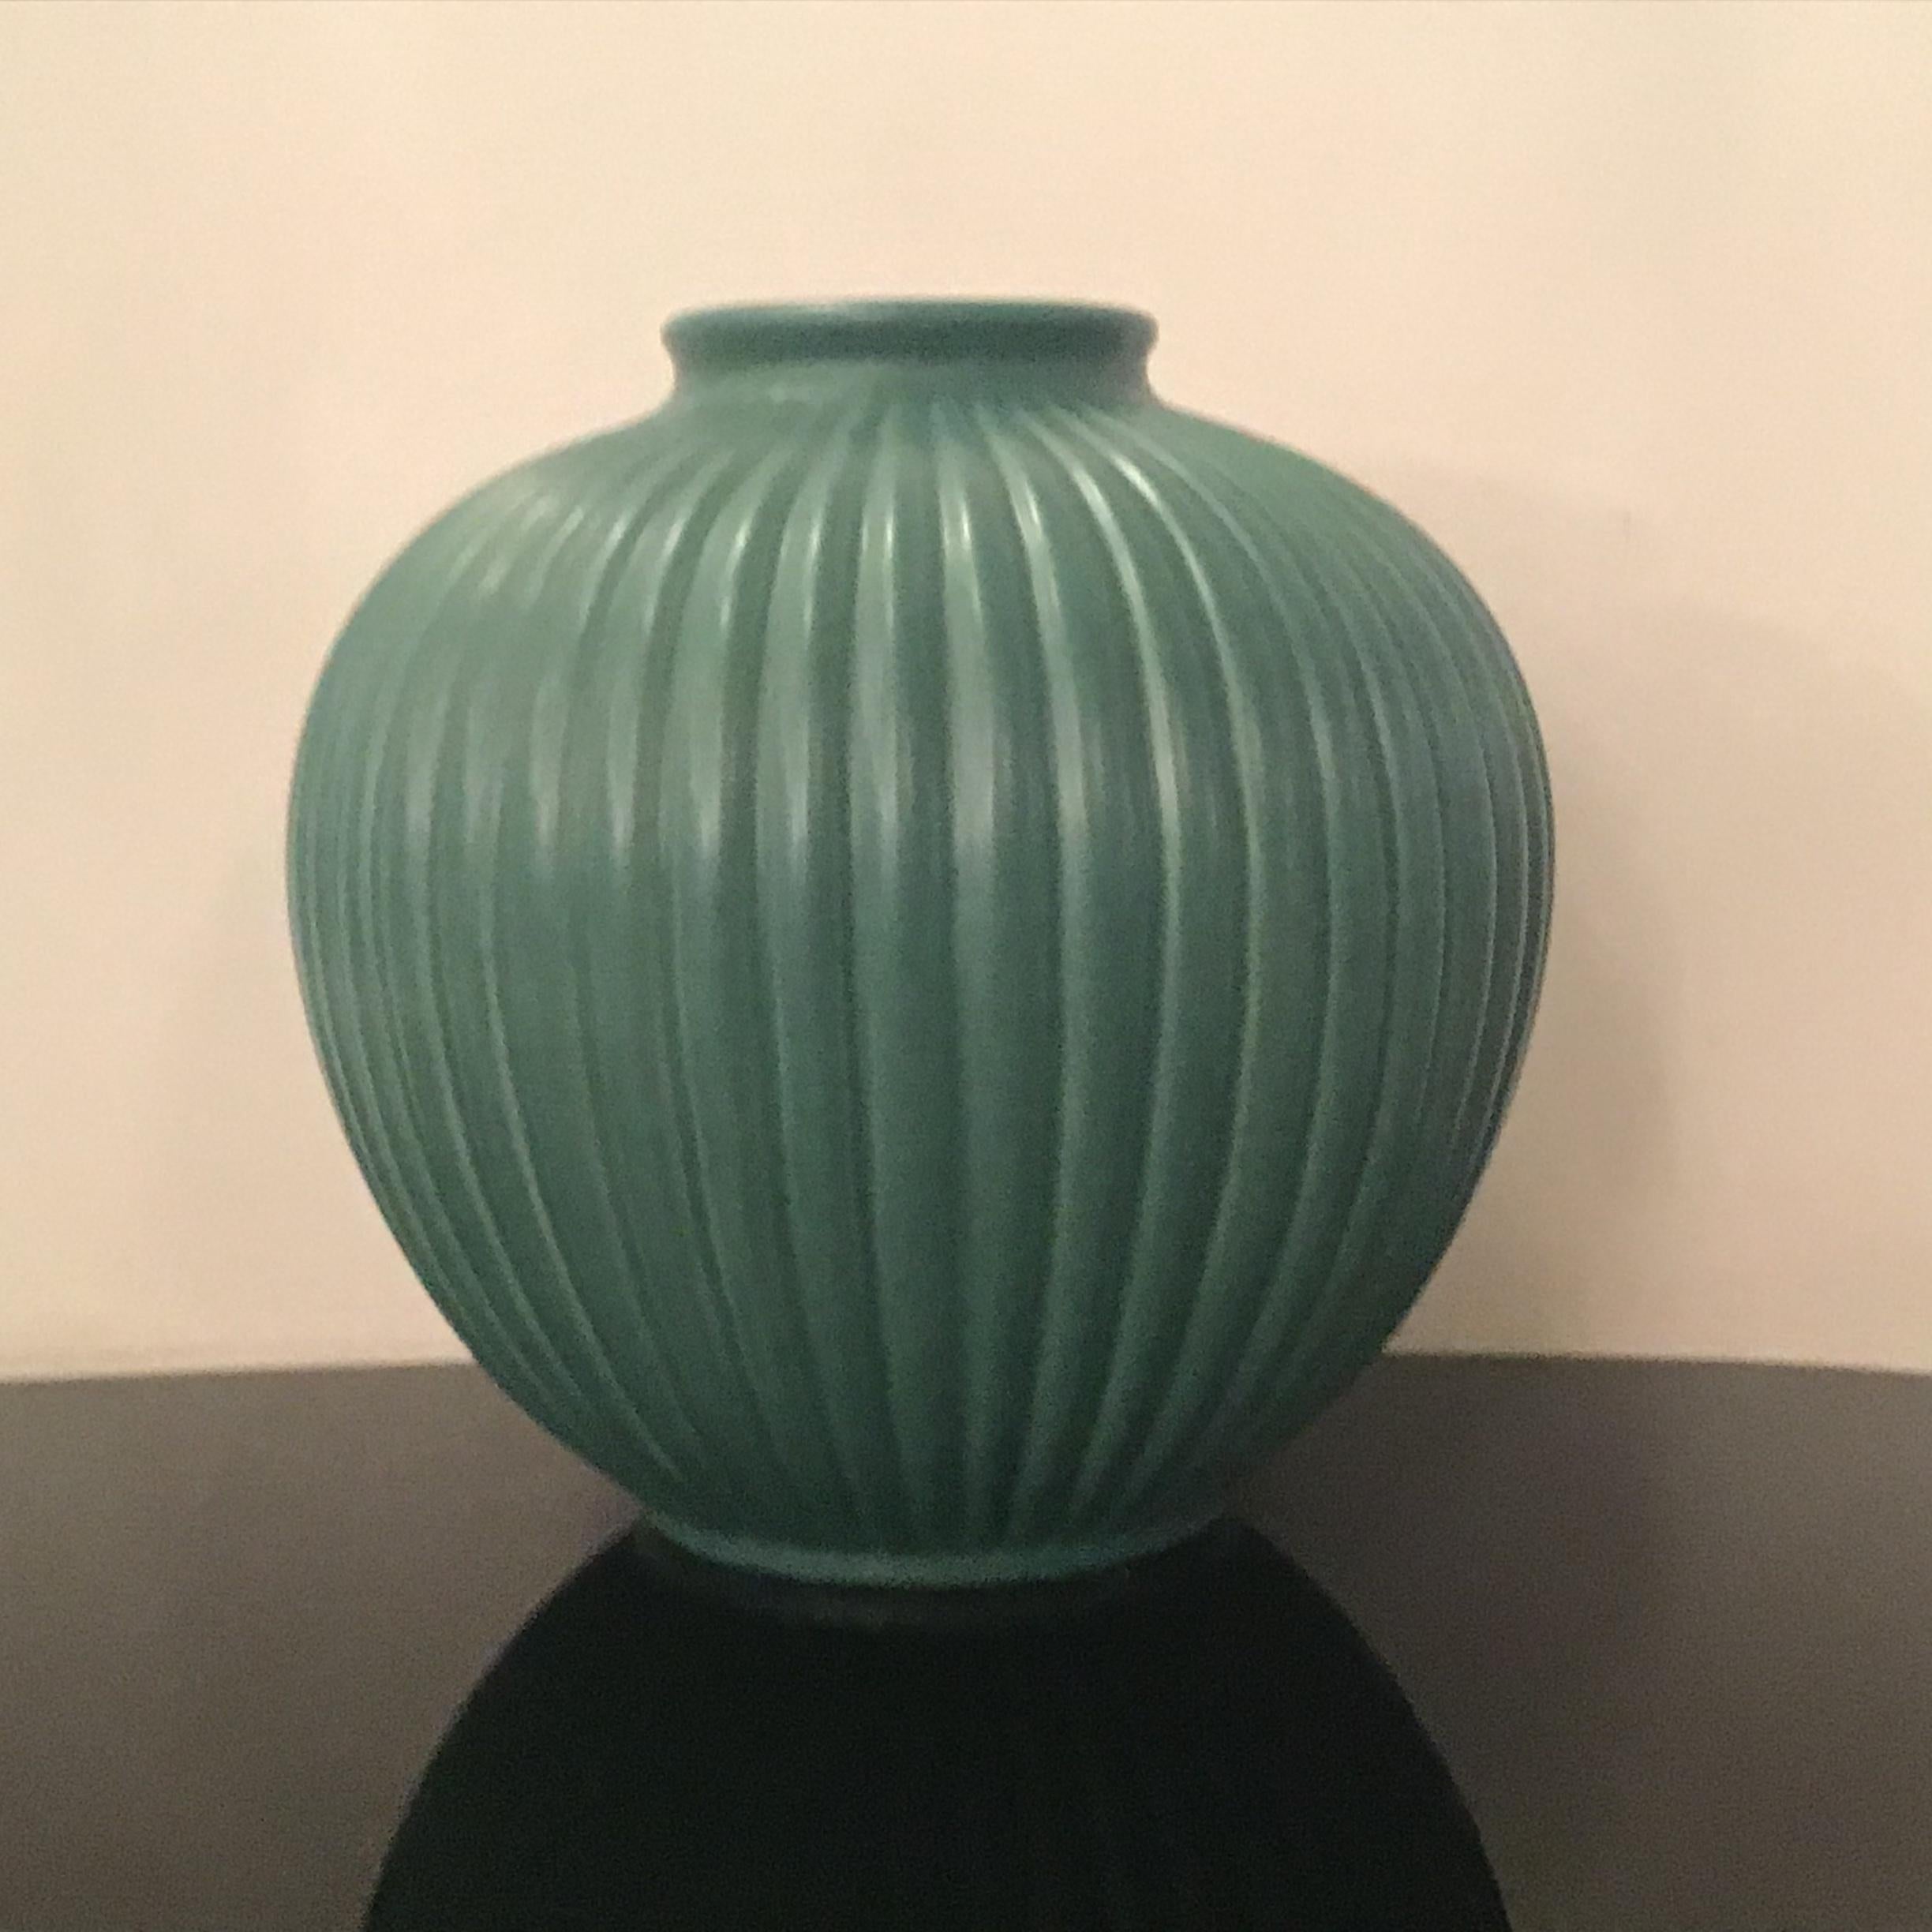 Richard Ginori Giovanni Gariboldi Pair of Vases Green Ceramic 1950 Italy In Excellent Condition For Sale In Milano, IT